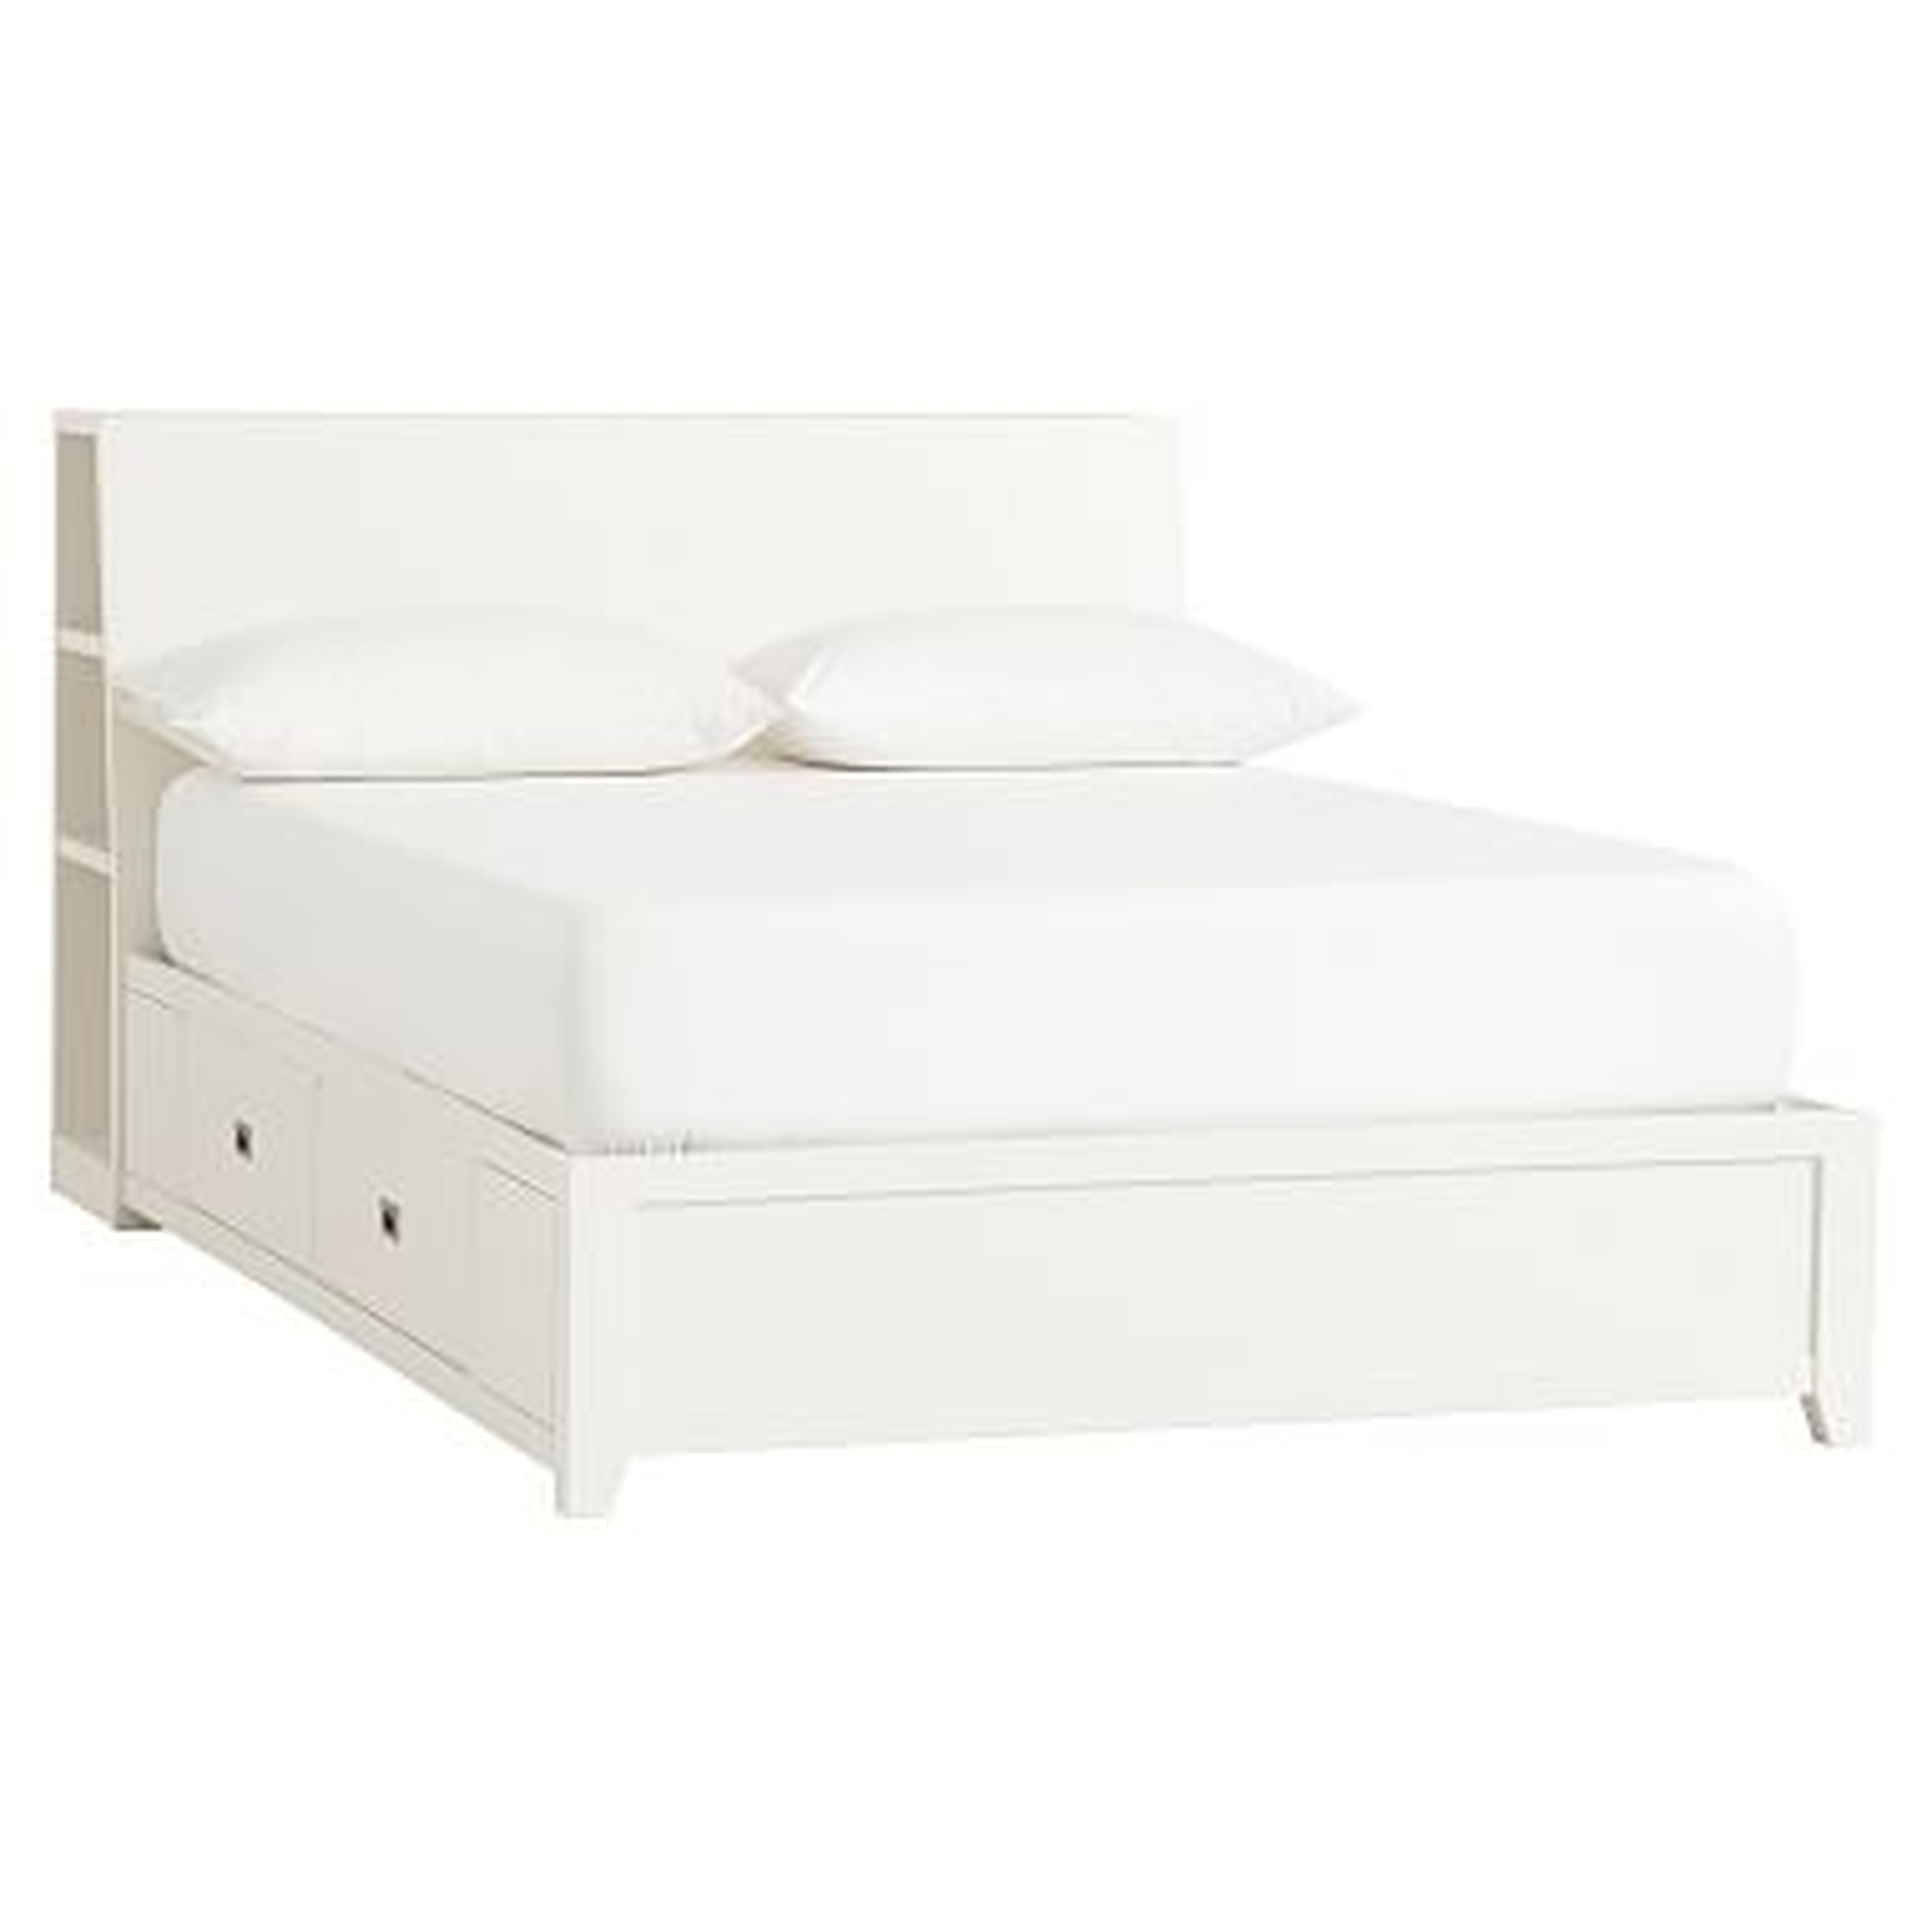 Findley Storage Bed, Full, Simply White - Pottery Barn Teen